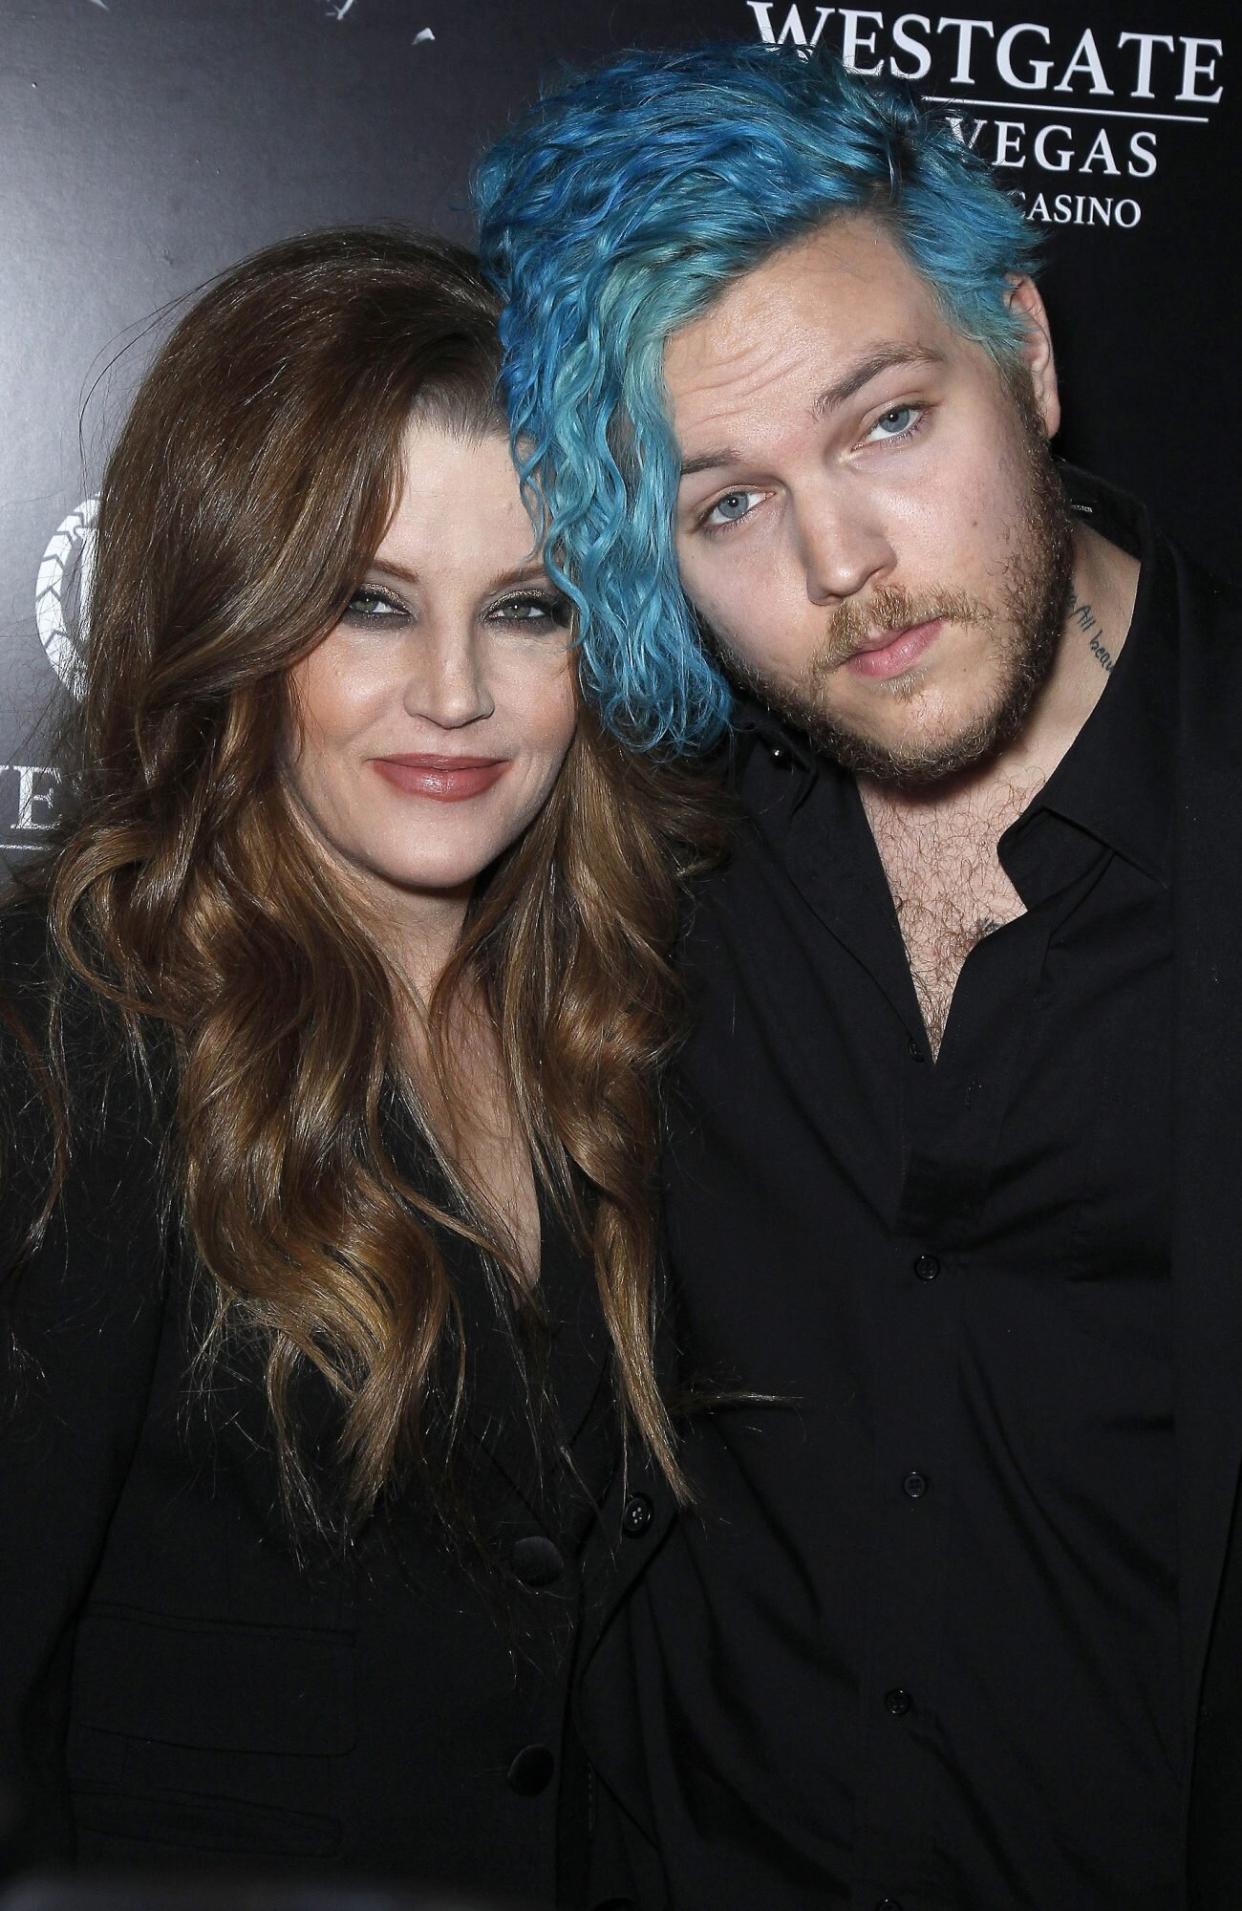 Mandatory Credit: Photo by MediaPunch/Shutterstock (10710847a) Lisa Marie Presley and Benjamin Presley Keough 'The Elvis Experience' musical production premiere, The Westgate Las Vegas Resort and Casino, Nevada, USA - 23 Apr 2015